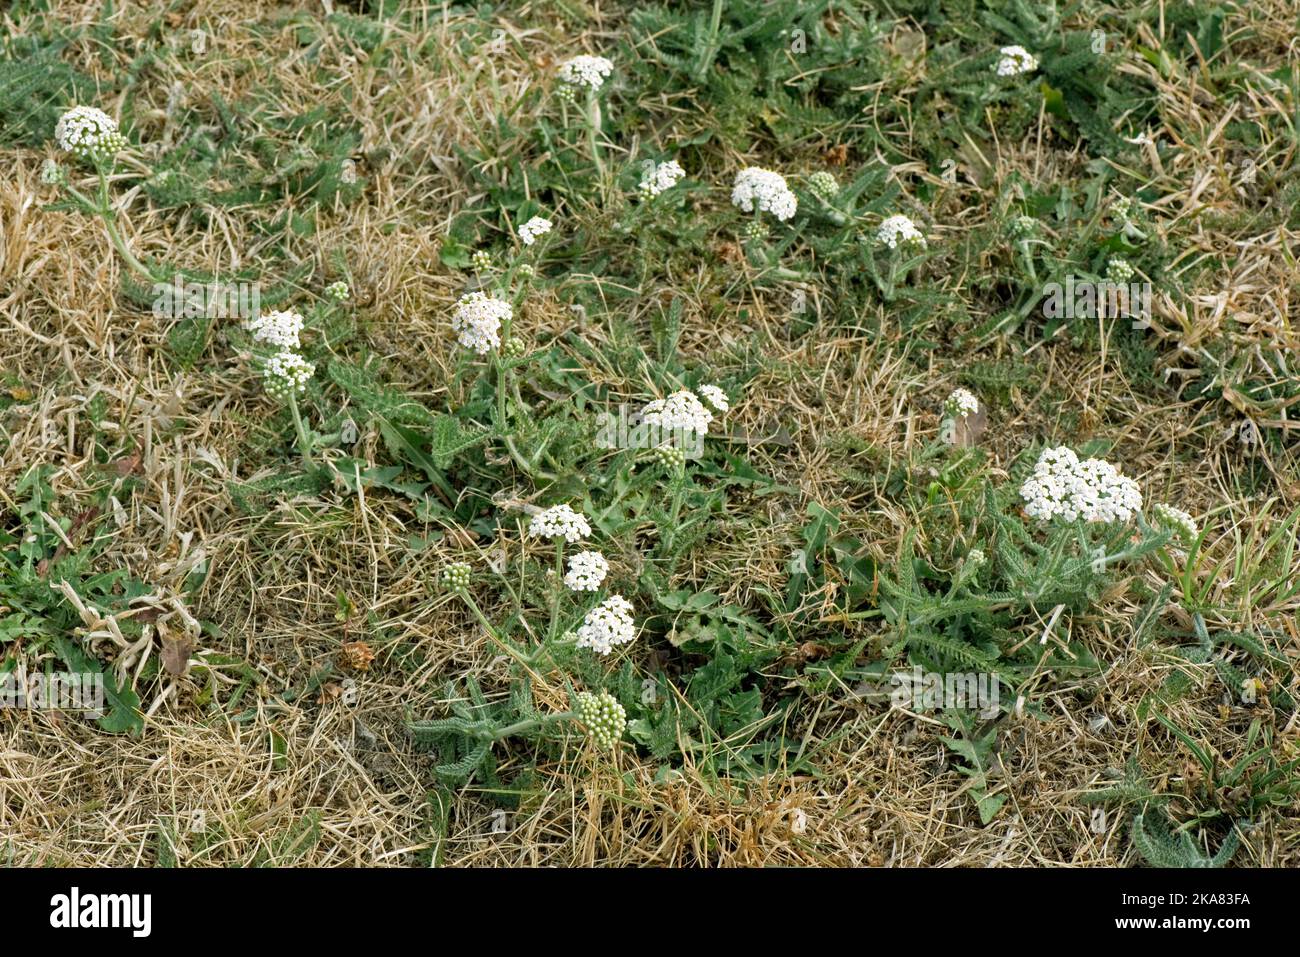 Yarrow (Achillea millefolium) tough and green with white flowers surving in dry arid grass pasture in a long hot summer drought, Berkshire, August 202 Stock Photo